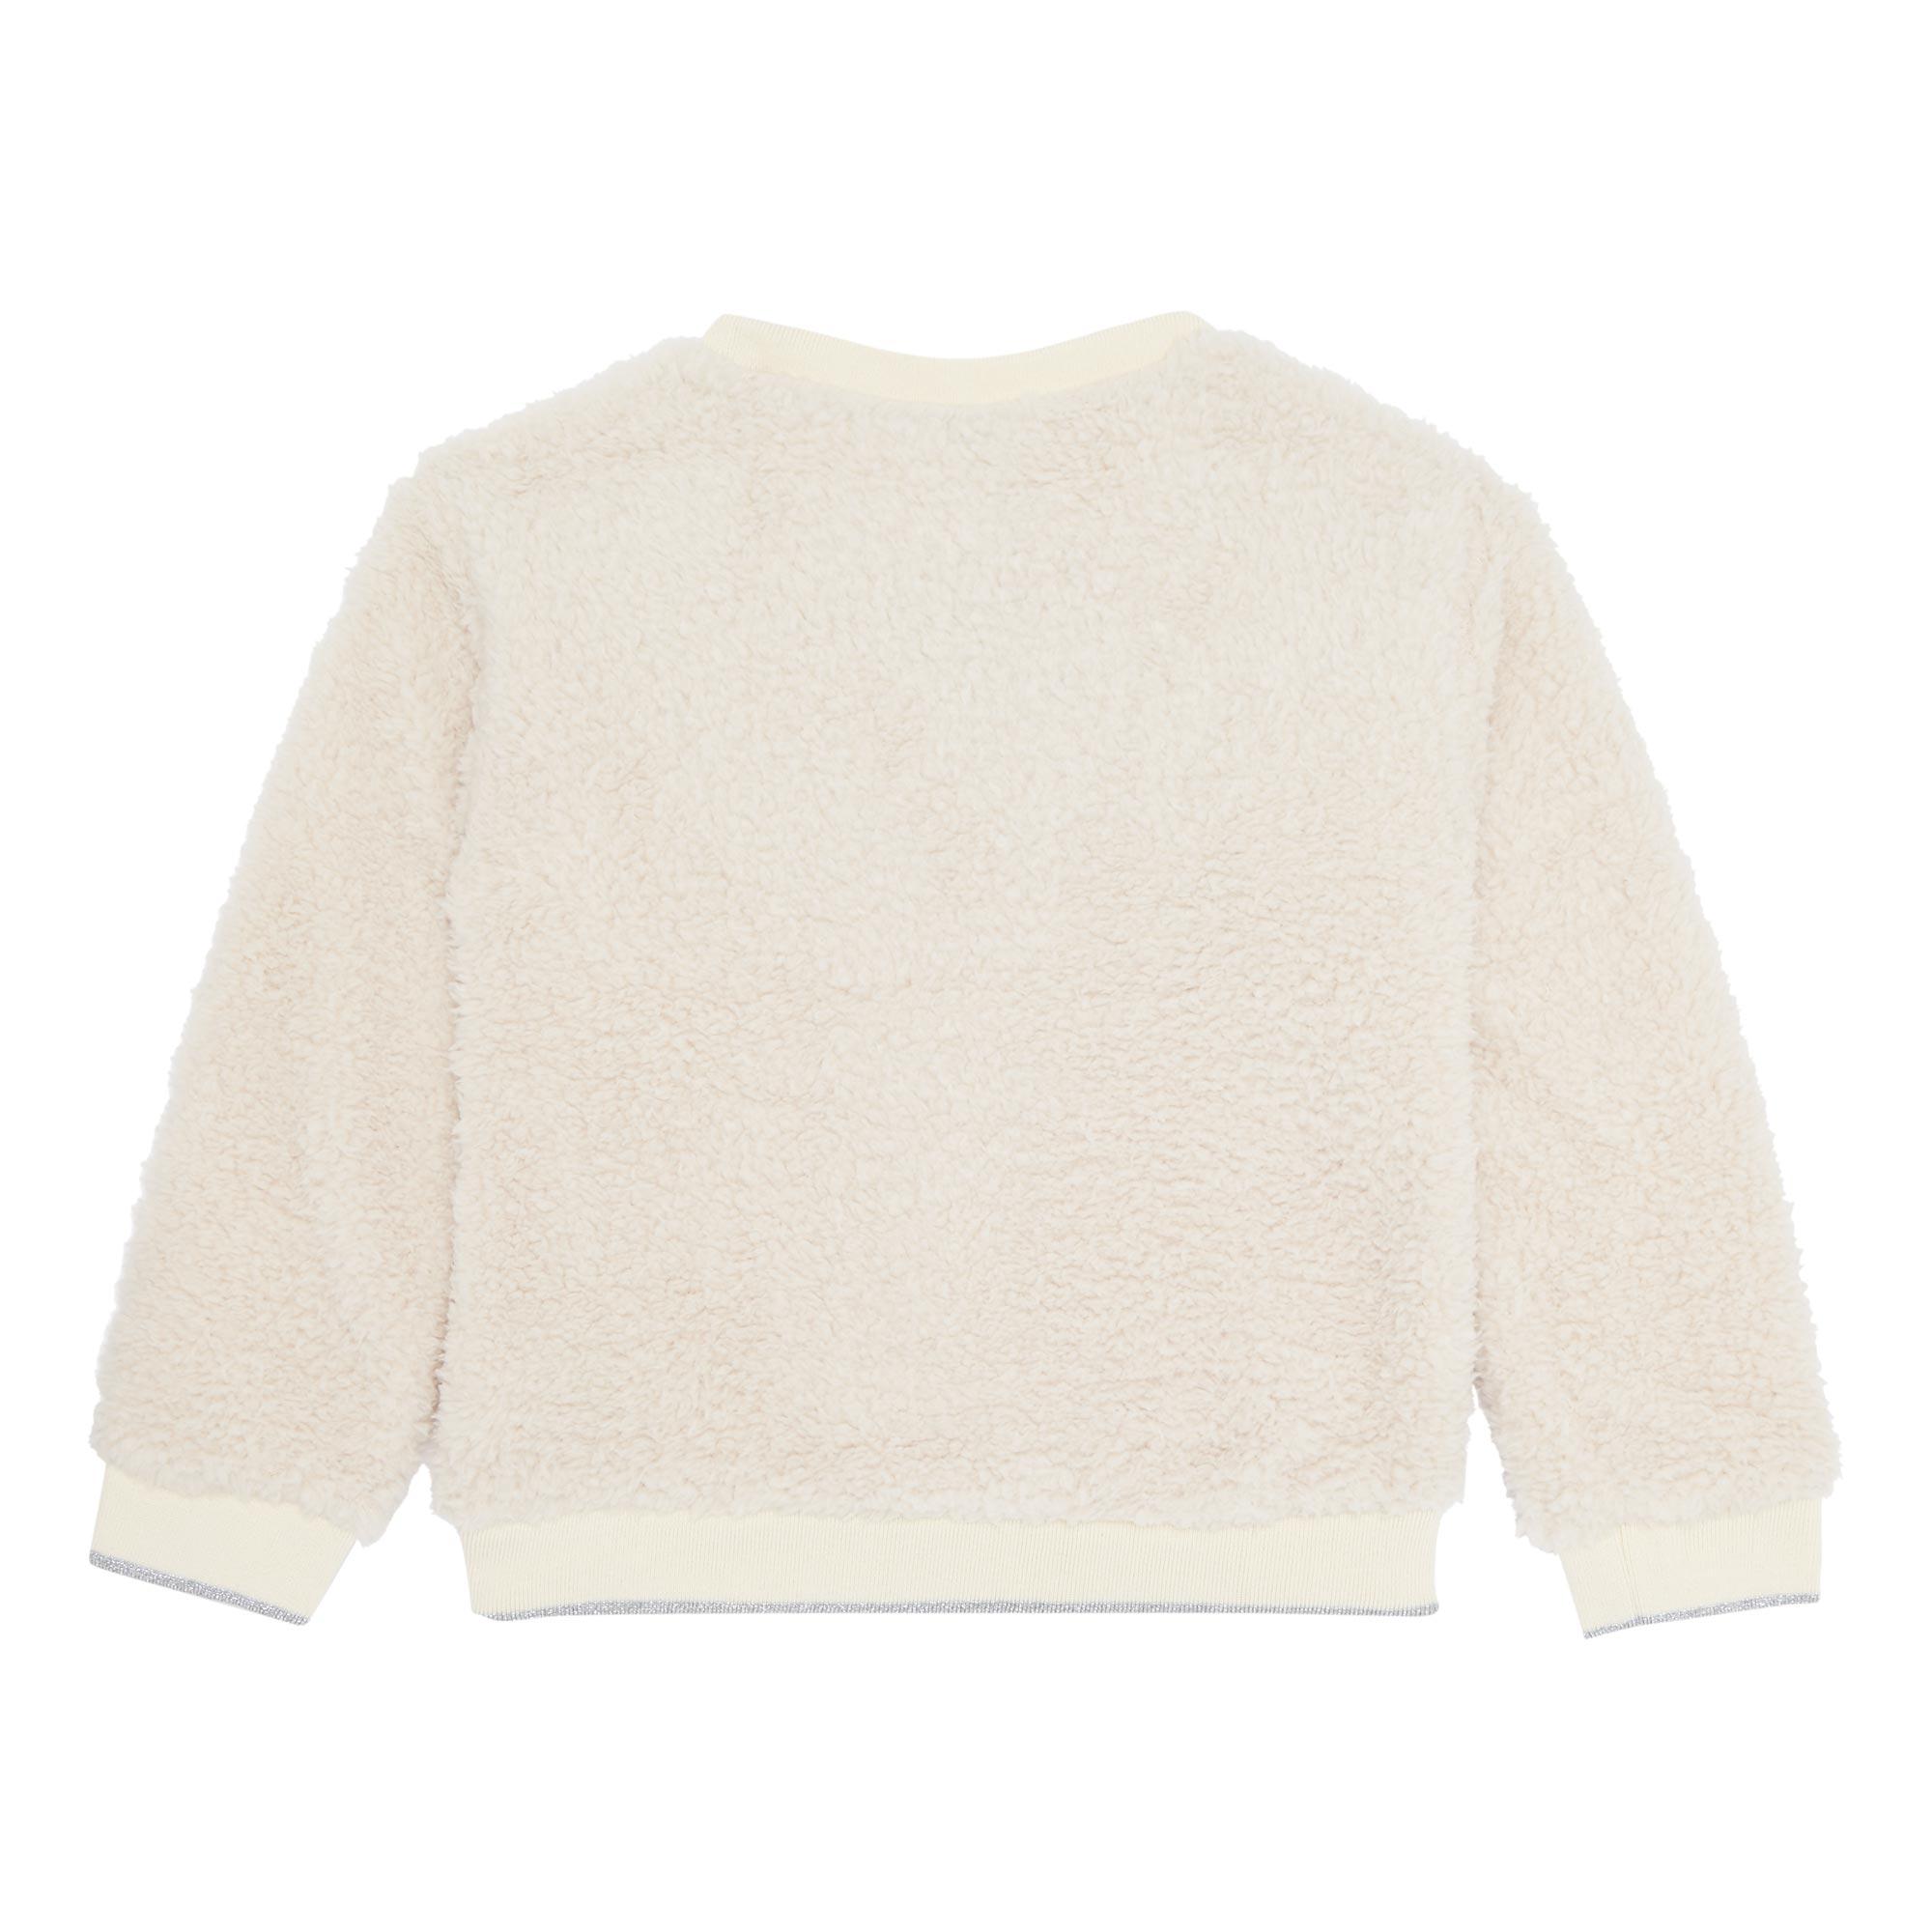 Amore Fluffy Sweat Top